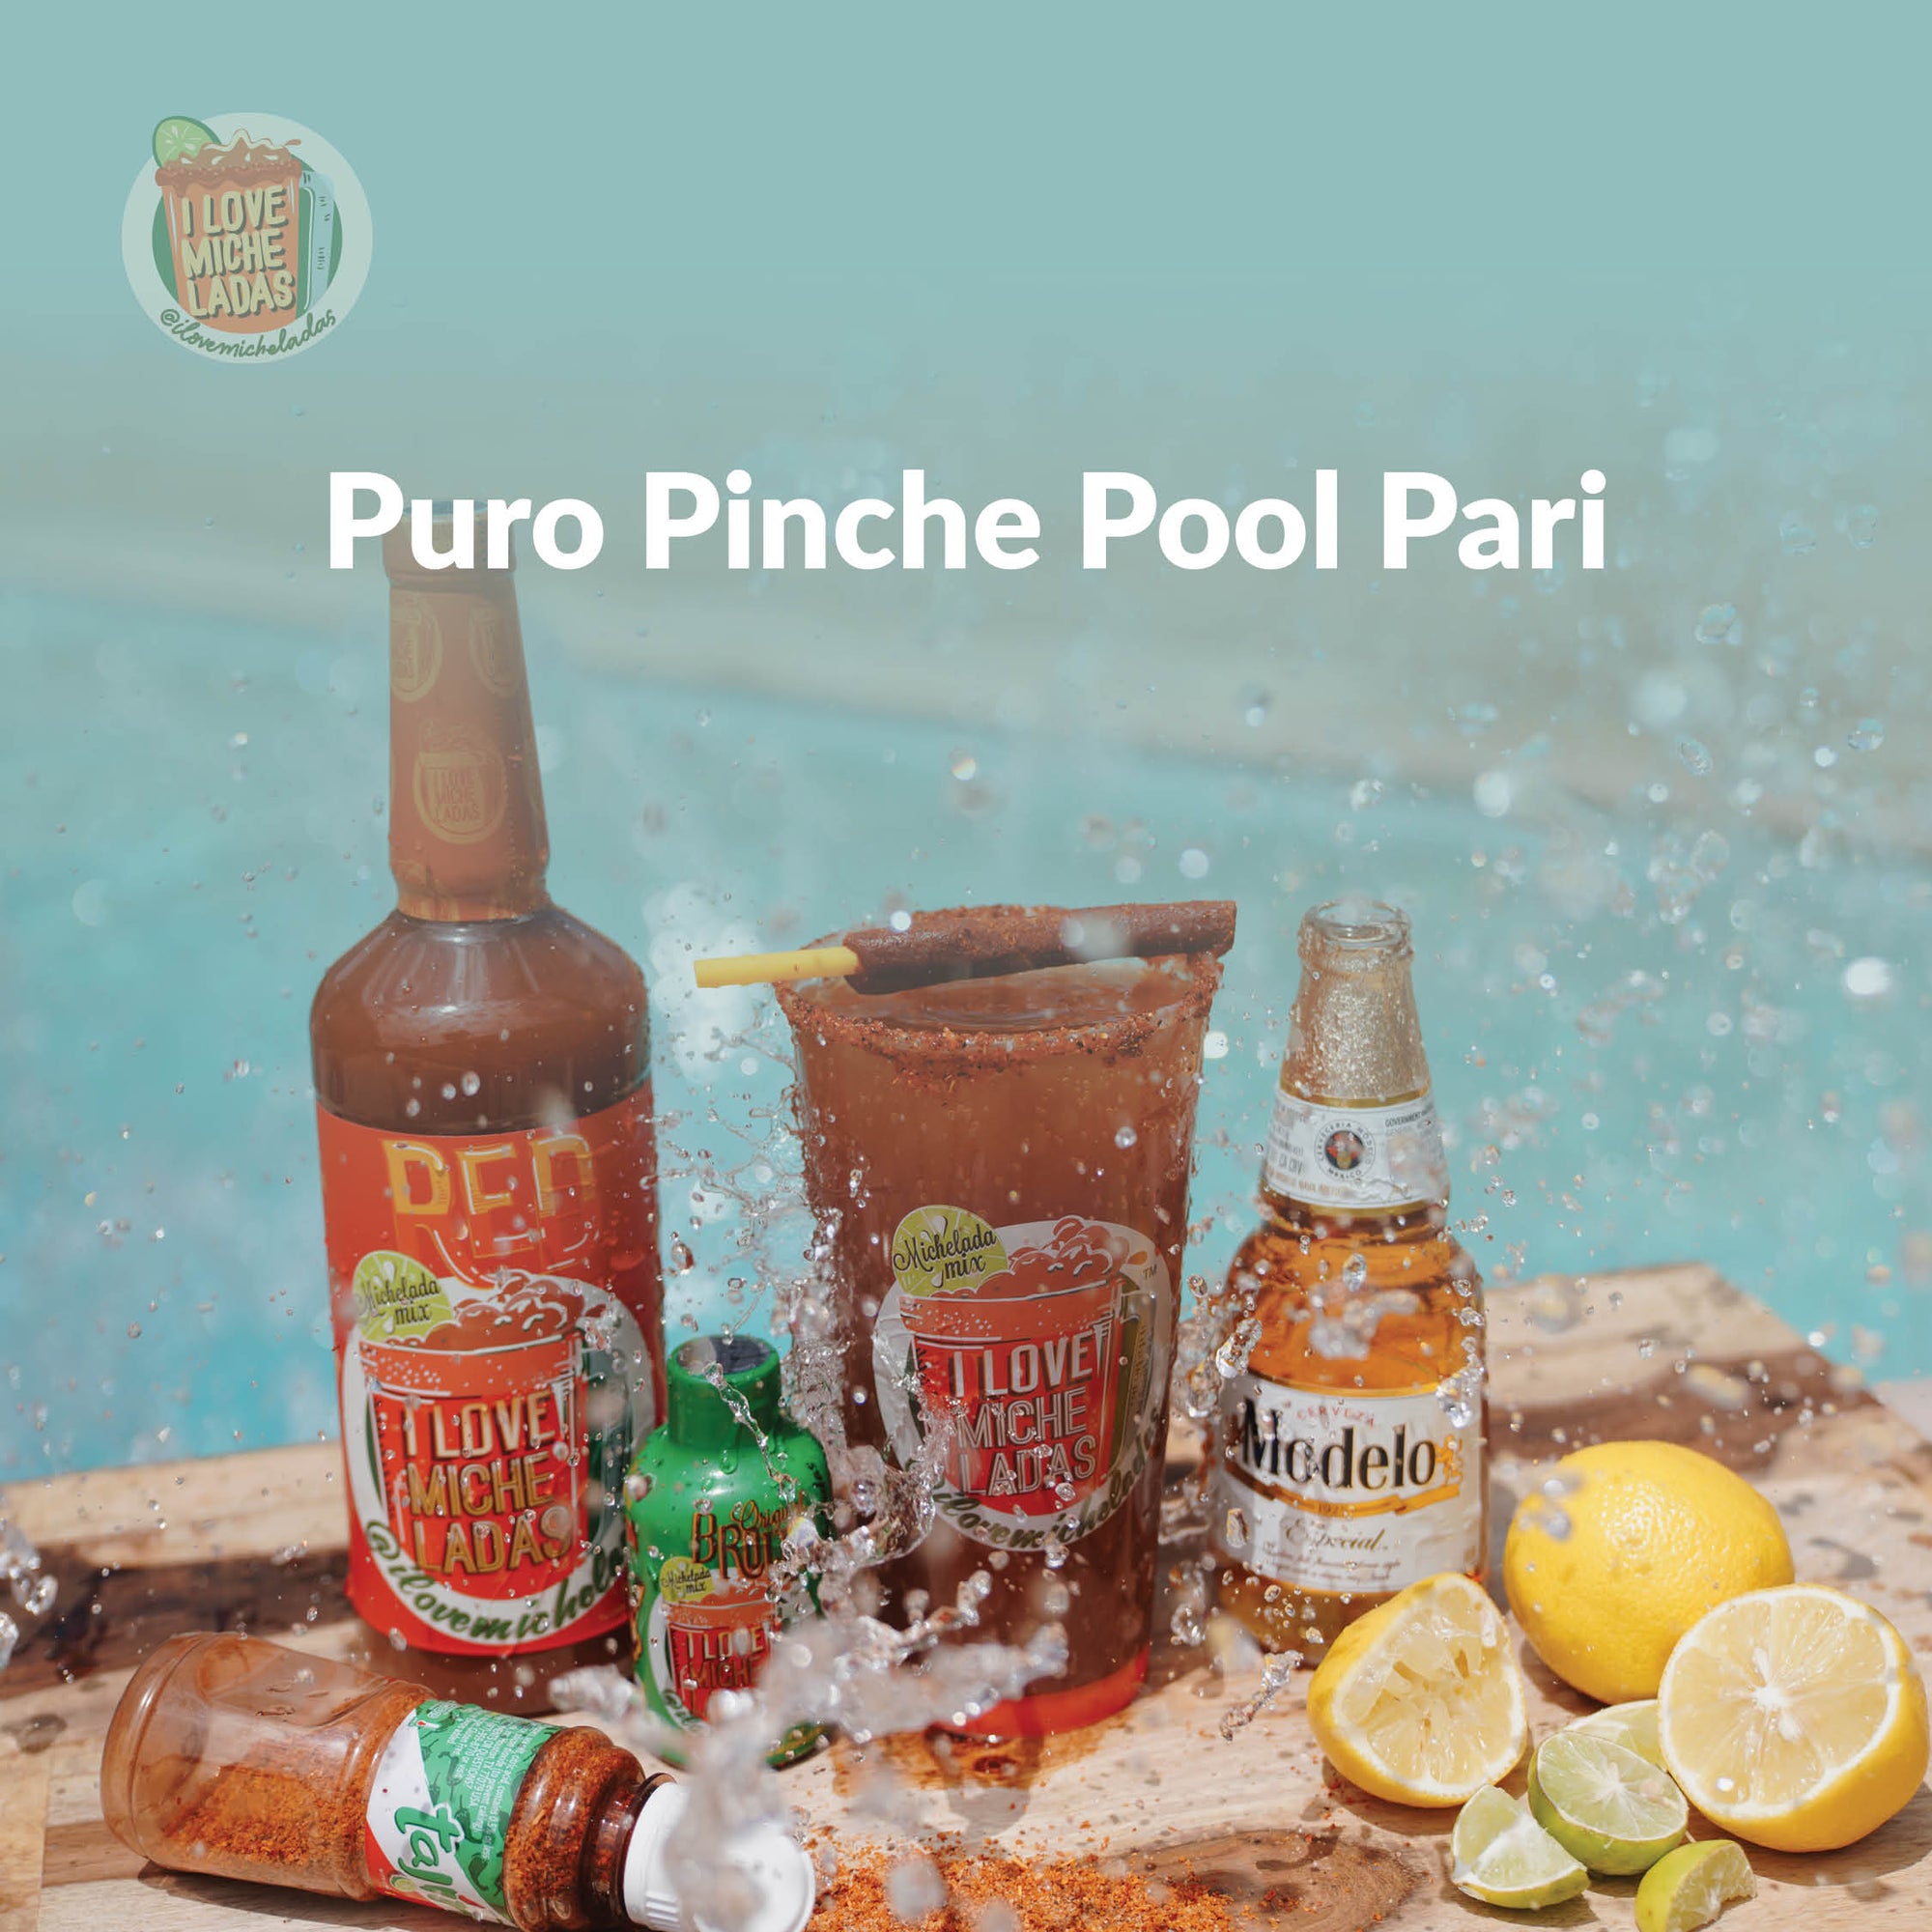 MICHE MIX OF THE WEEK: THE ONE WITH THE PURO PINCHE POOL PARI TRACKS